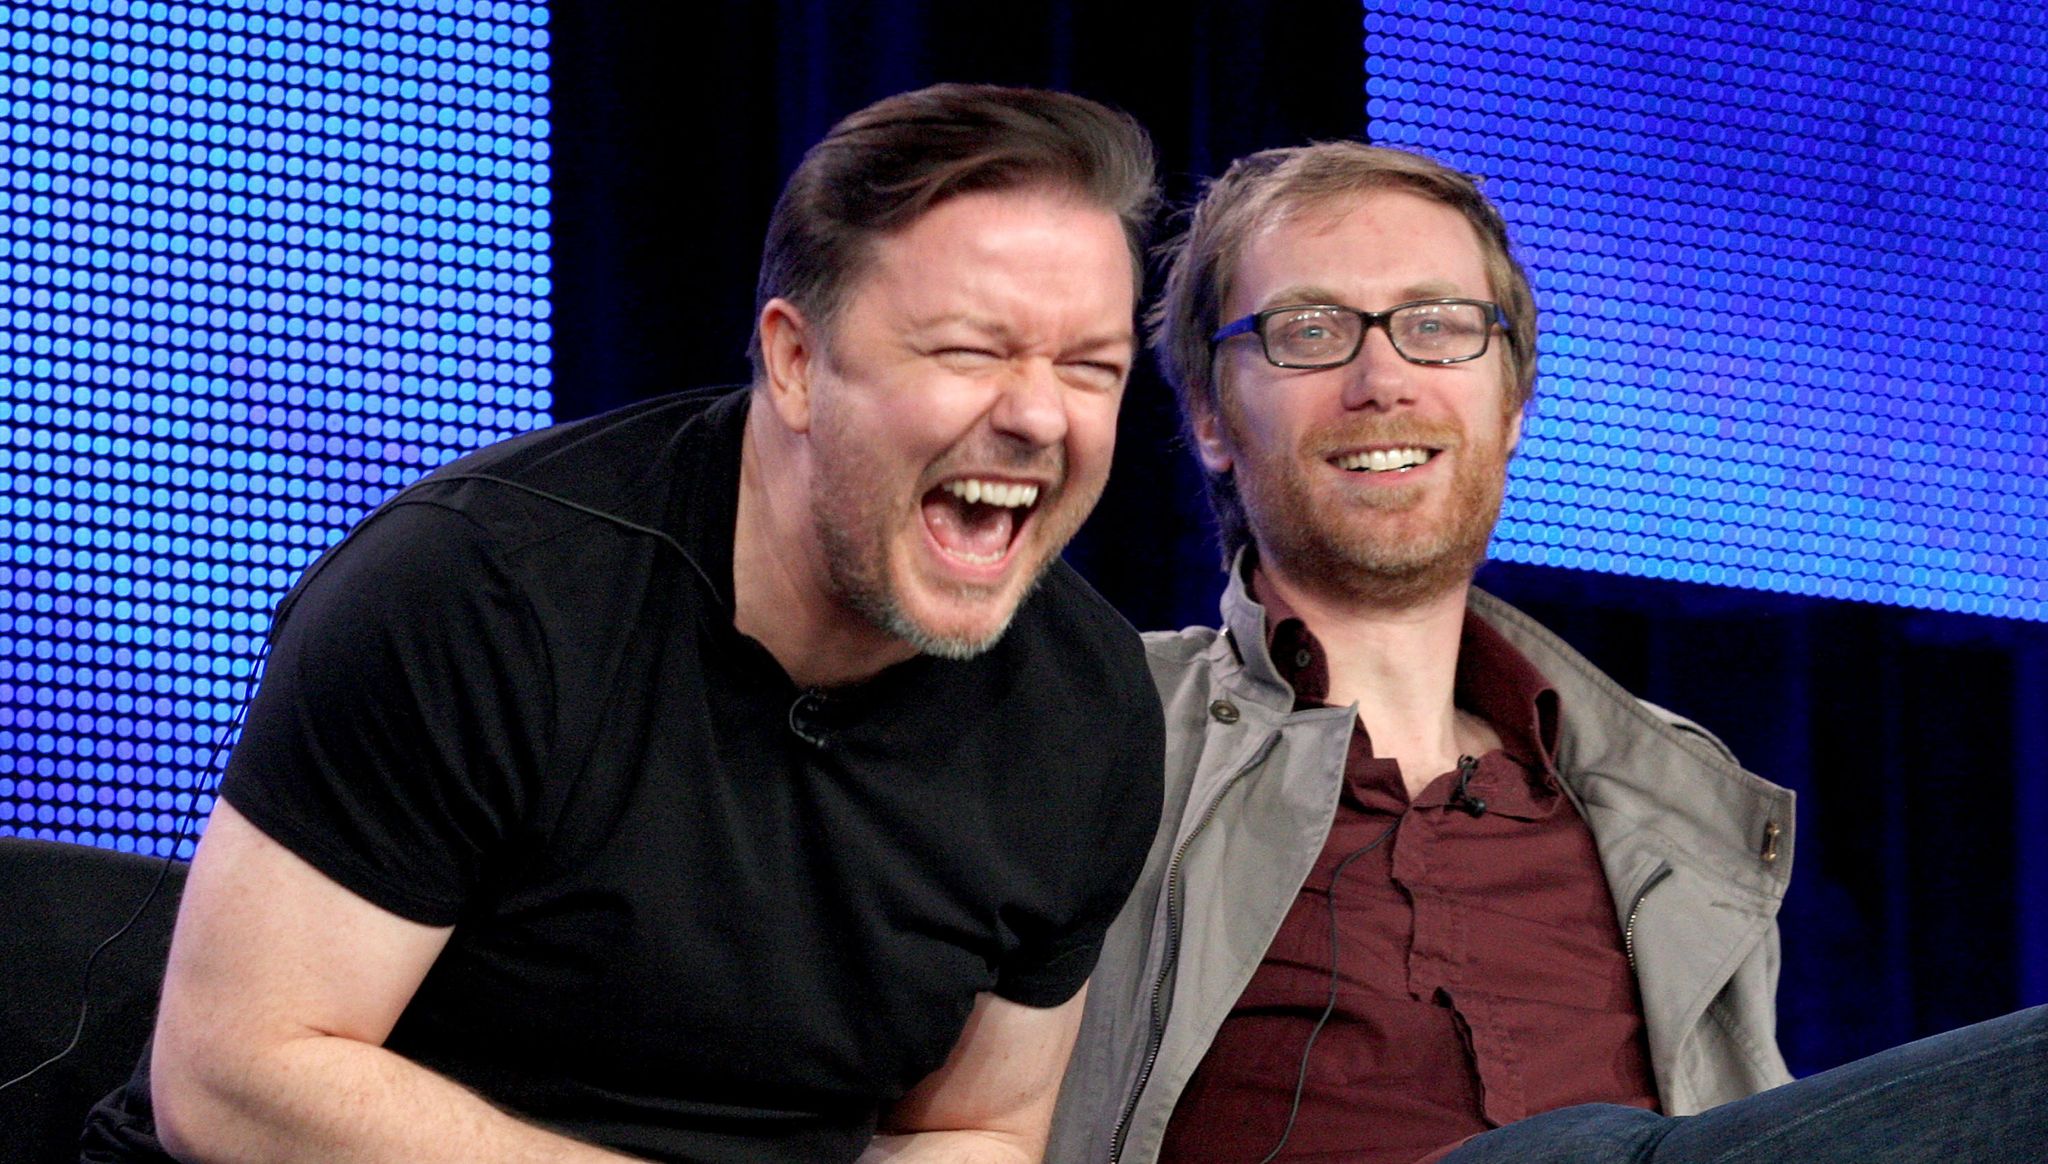 pasadena, ca   january 14  executive producers ricky gervais l and stephen merchant of the ricky gervais show speak during the hbo portion of the 2010 television critics association press tour at the langham hotel on january 14, 2010 in pasadena, california  photo by frederick m browngetty images